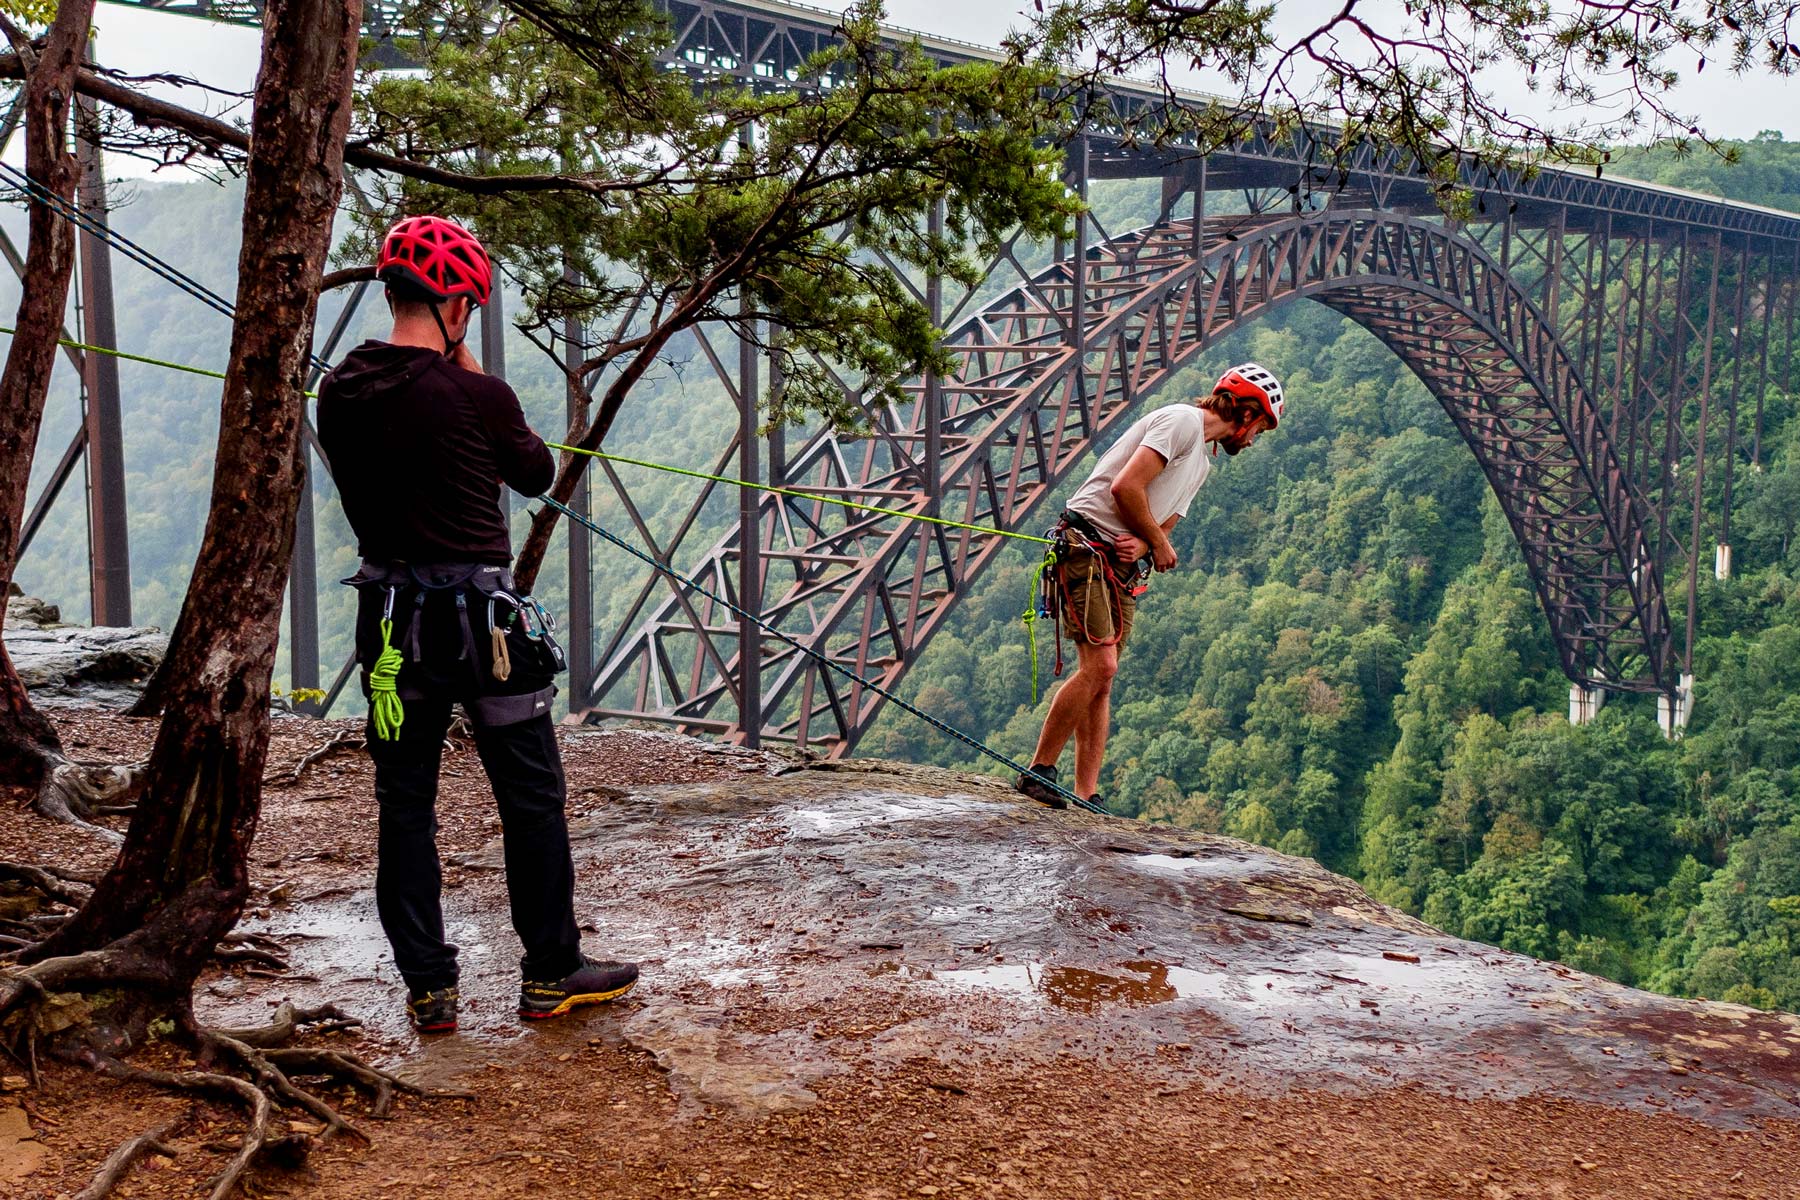 things to do new river gorge national park, new river gorge national park west virginia, rappelling, rock climbing